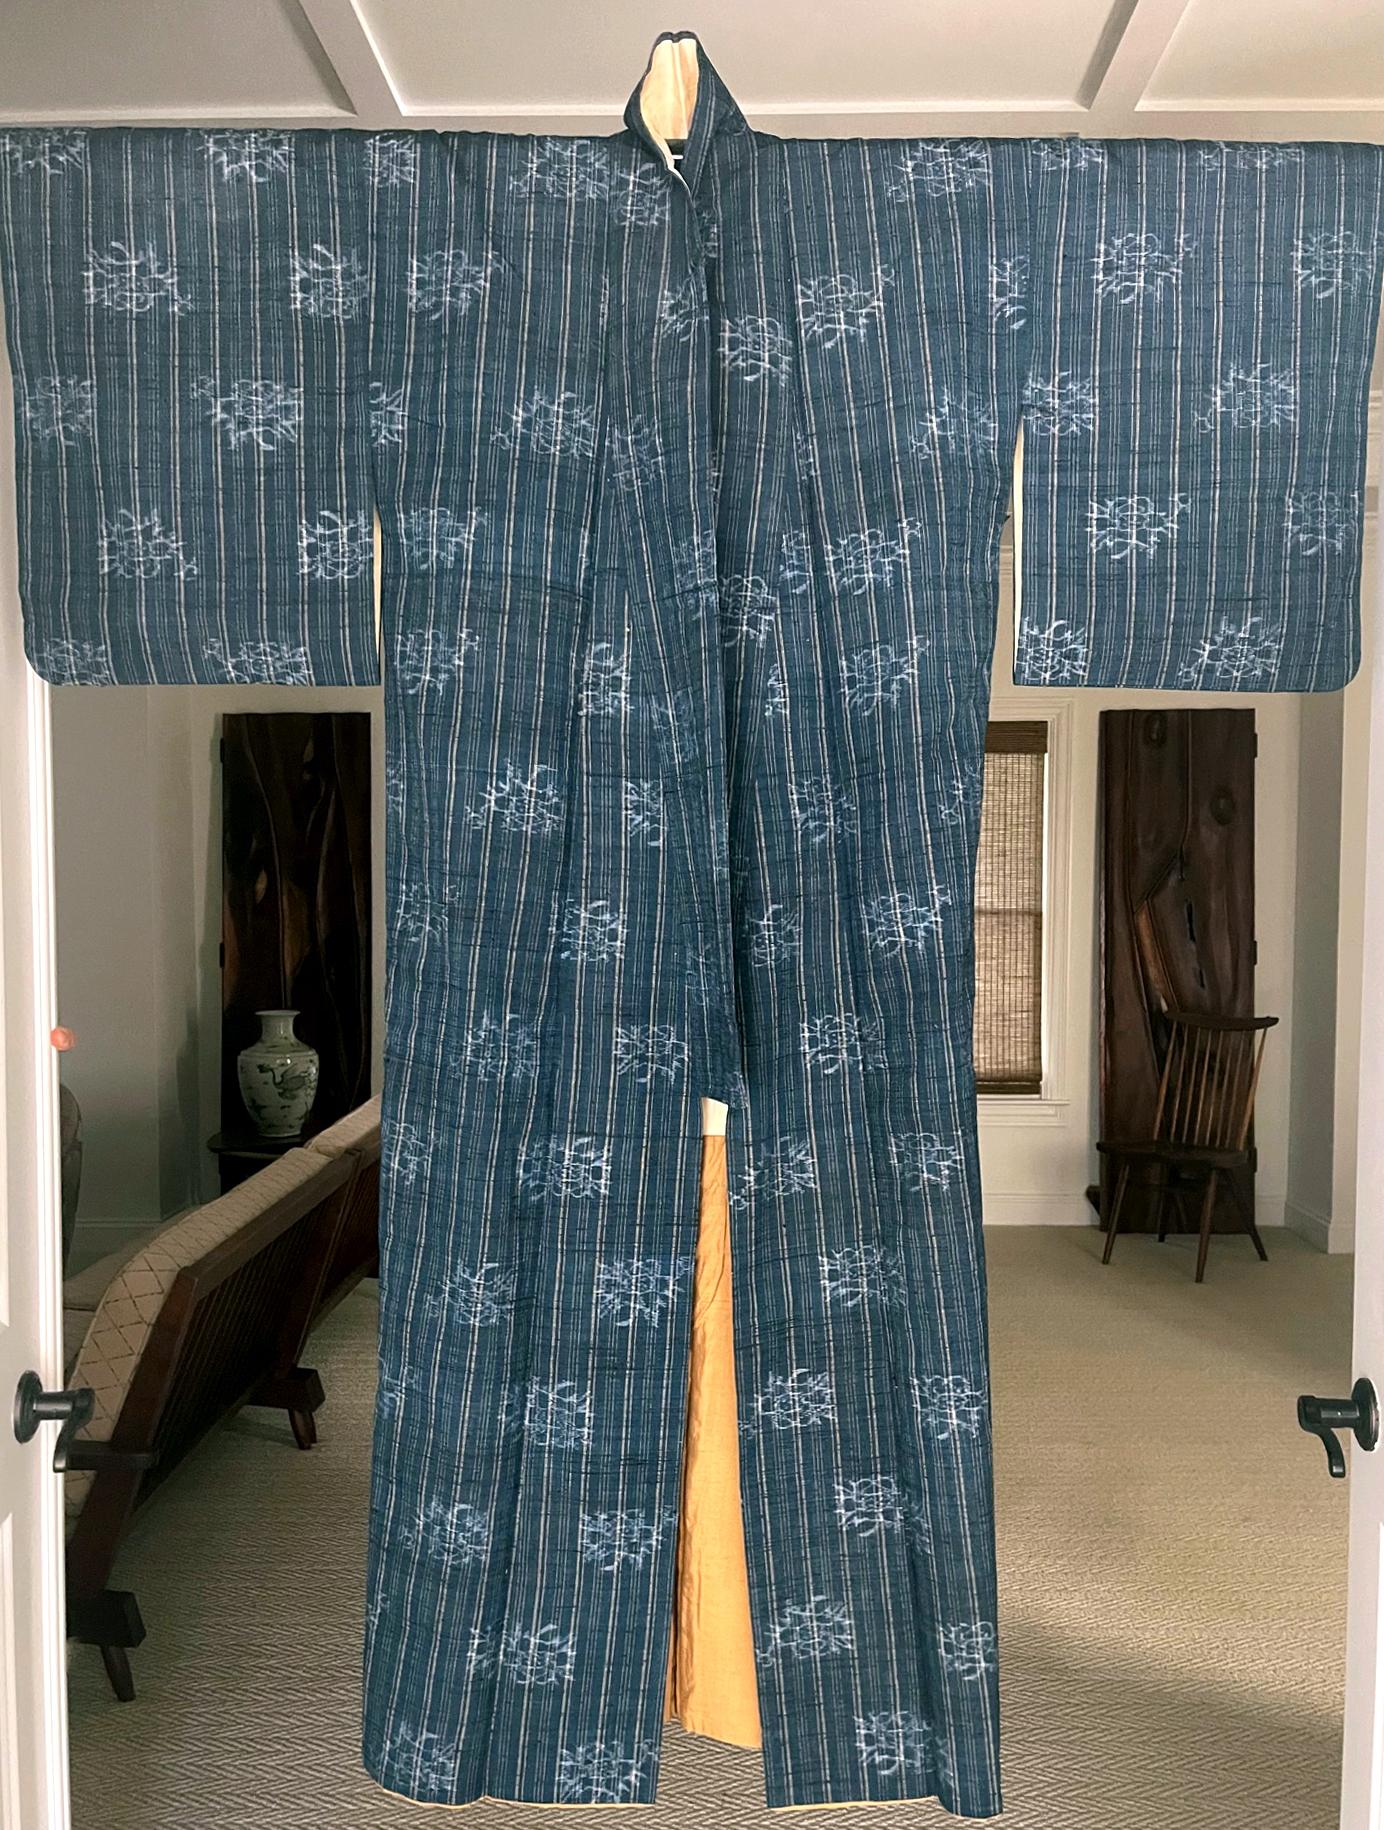 On offer is a Japanese summer kimono woven from indigo blue linen with ivory color fine stripes patterns with apparently darker weft additions. The elegant geometrical pattern is accentuated with stenciled white pattern of a floral design, likely